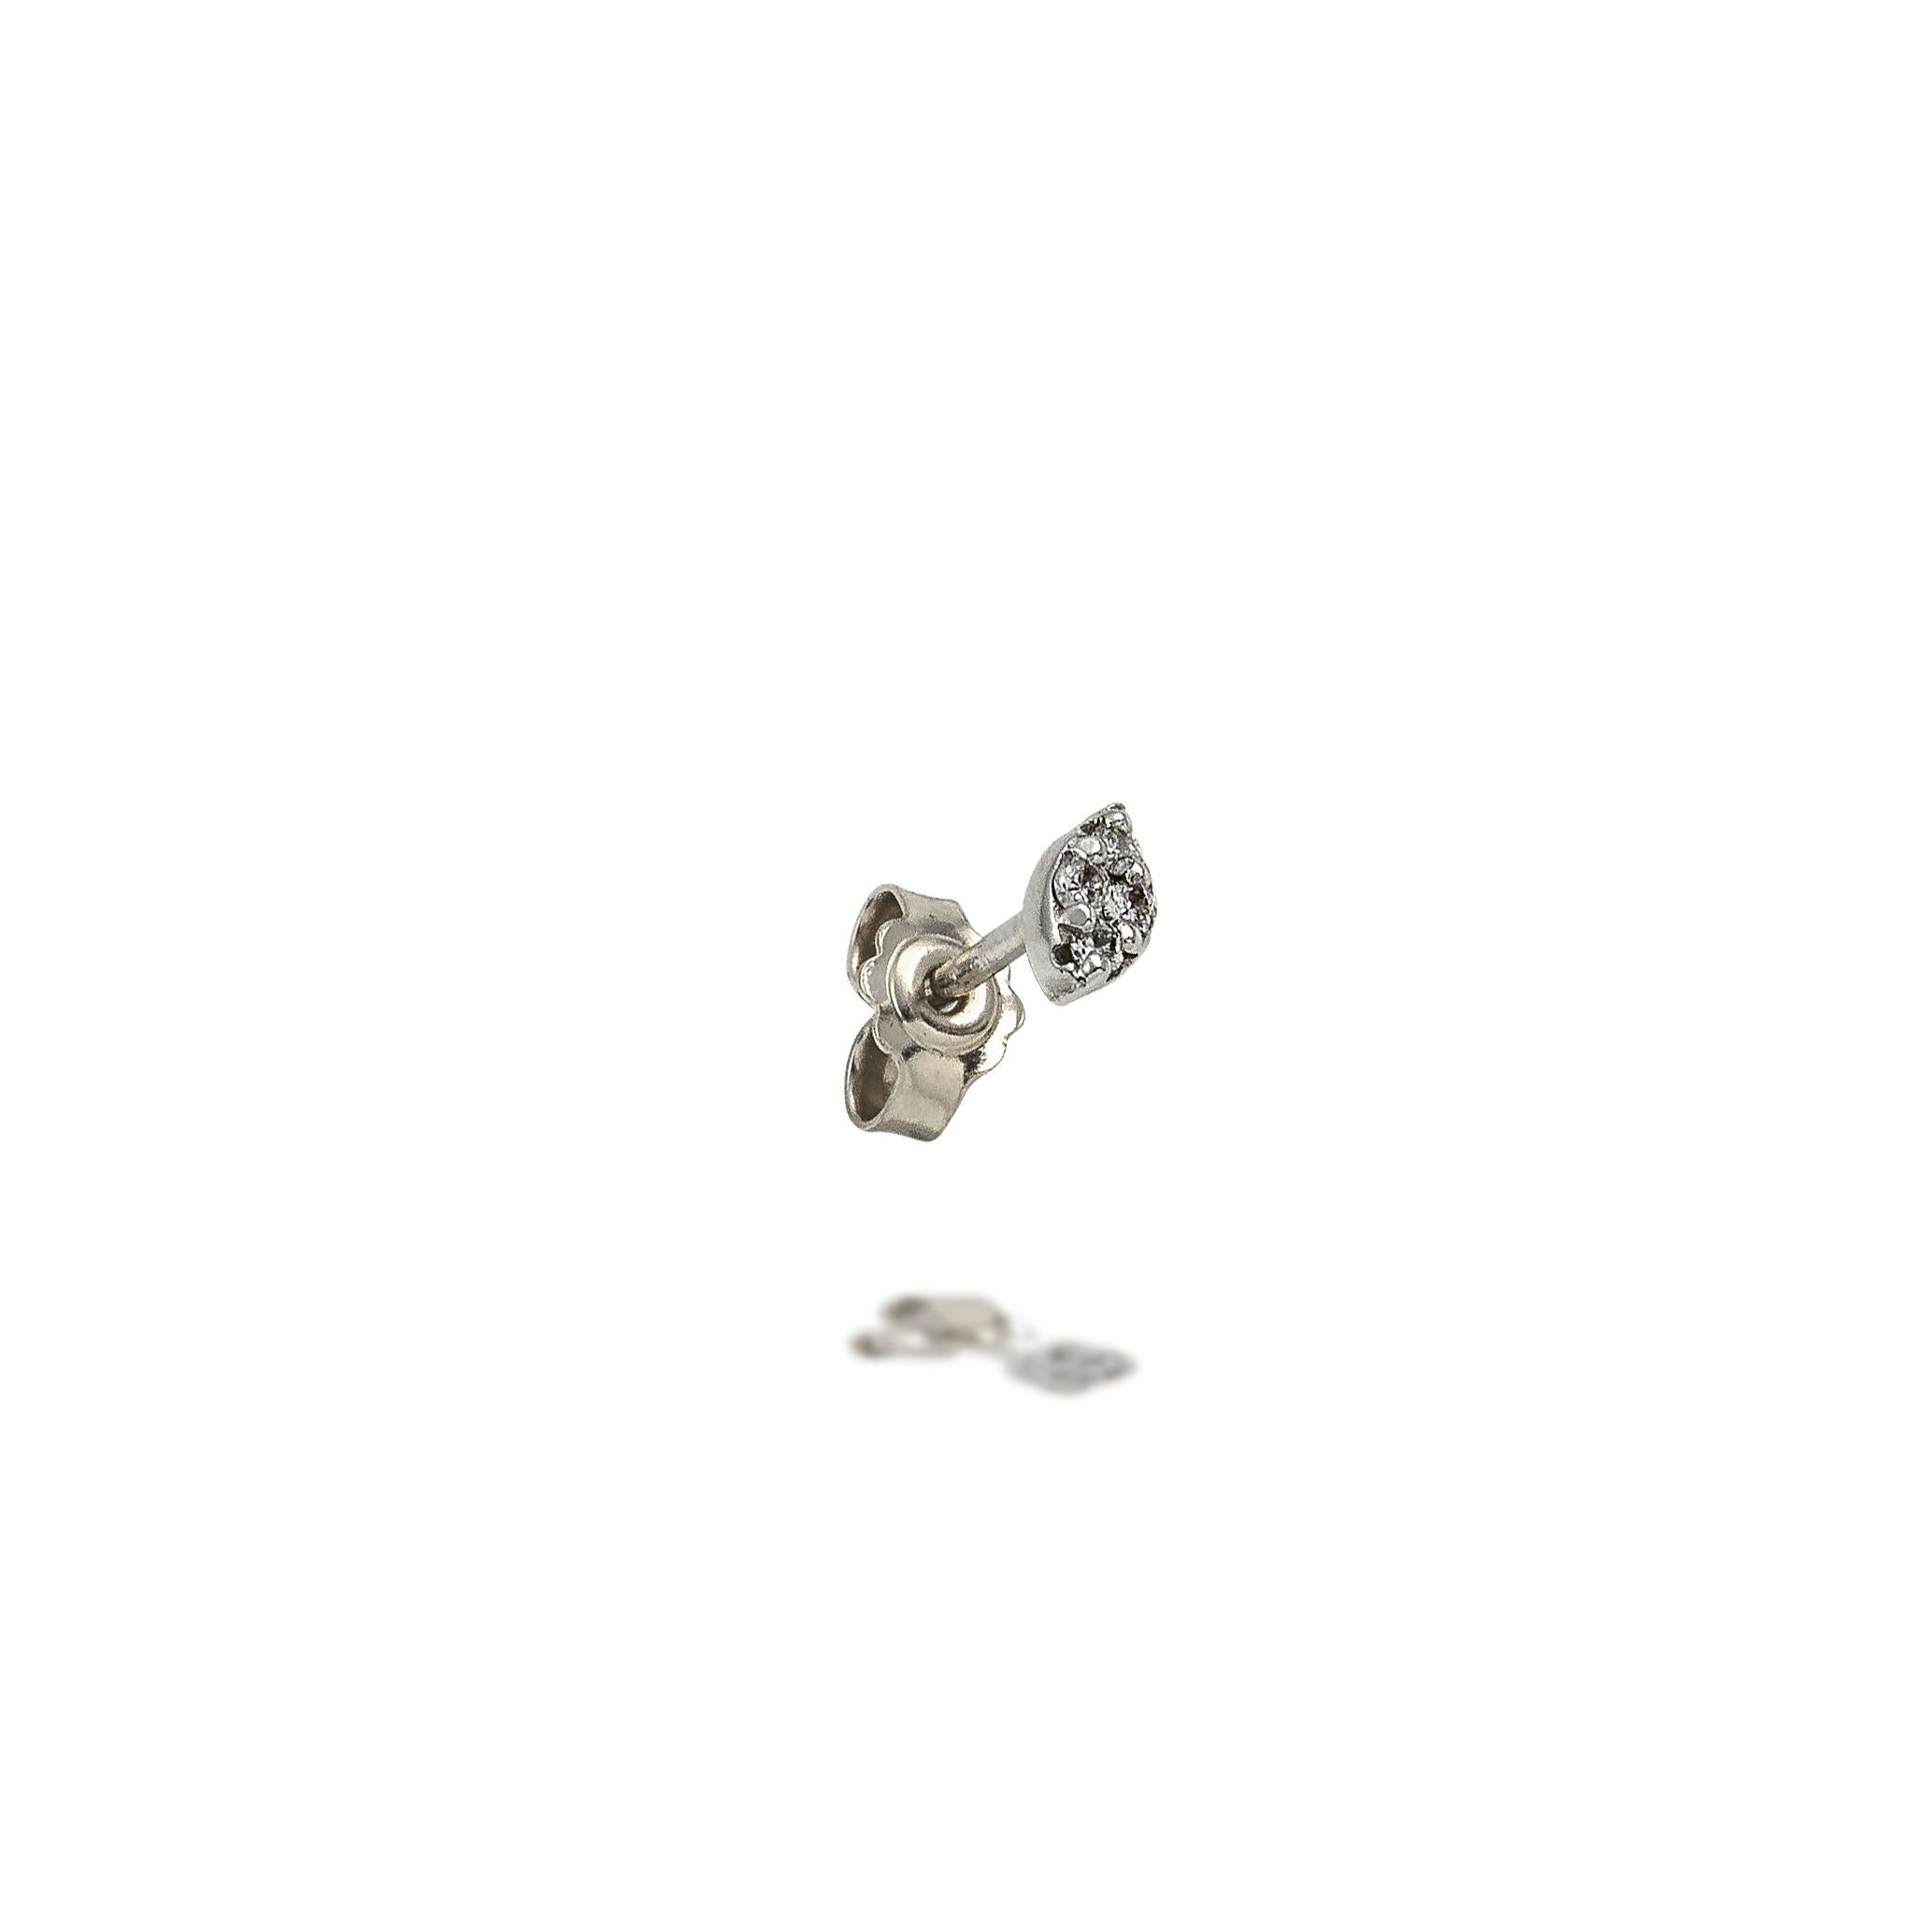 Recycled 14K White Gold

Diamonds Approx. 0.06 ct

Small Single Marquise Earring Stud in White Gold and Diamonds

This collection combines the simplicity of the single piece with the opulence of diamonds.

All jewels in the Essentials – Mix & Match